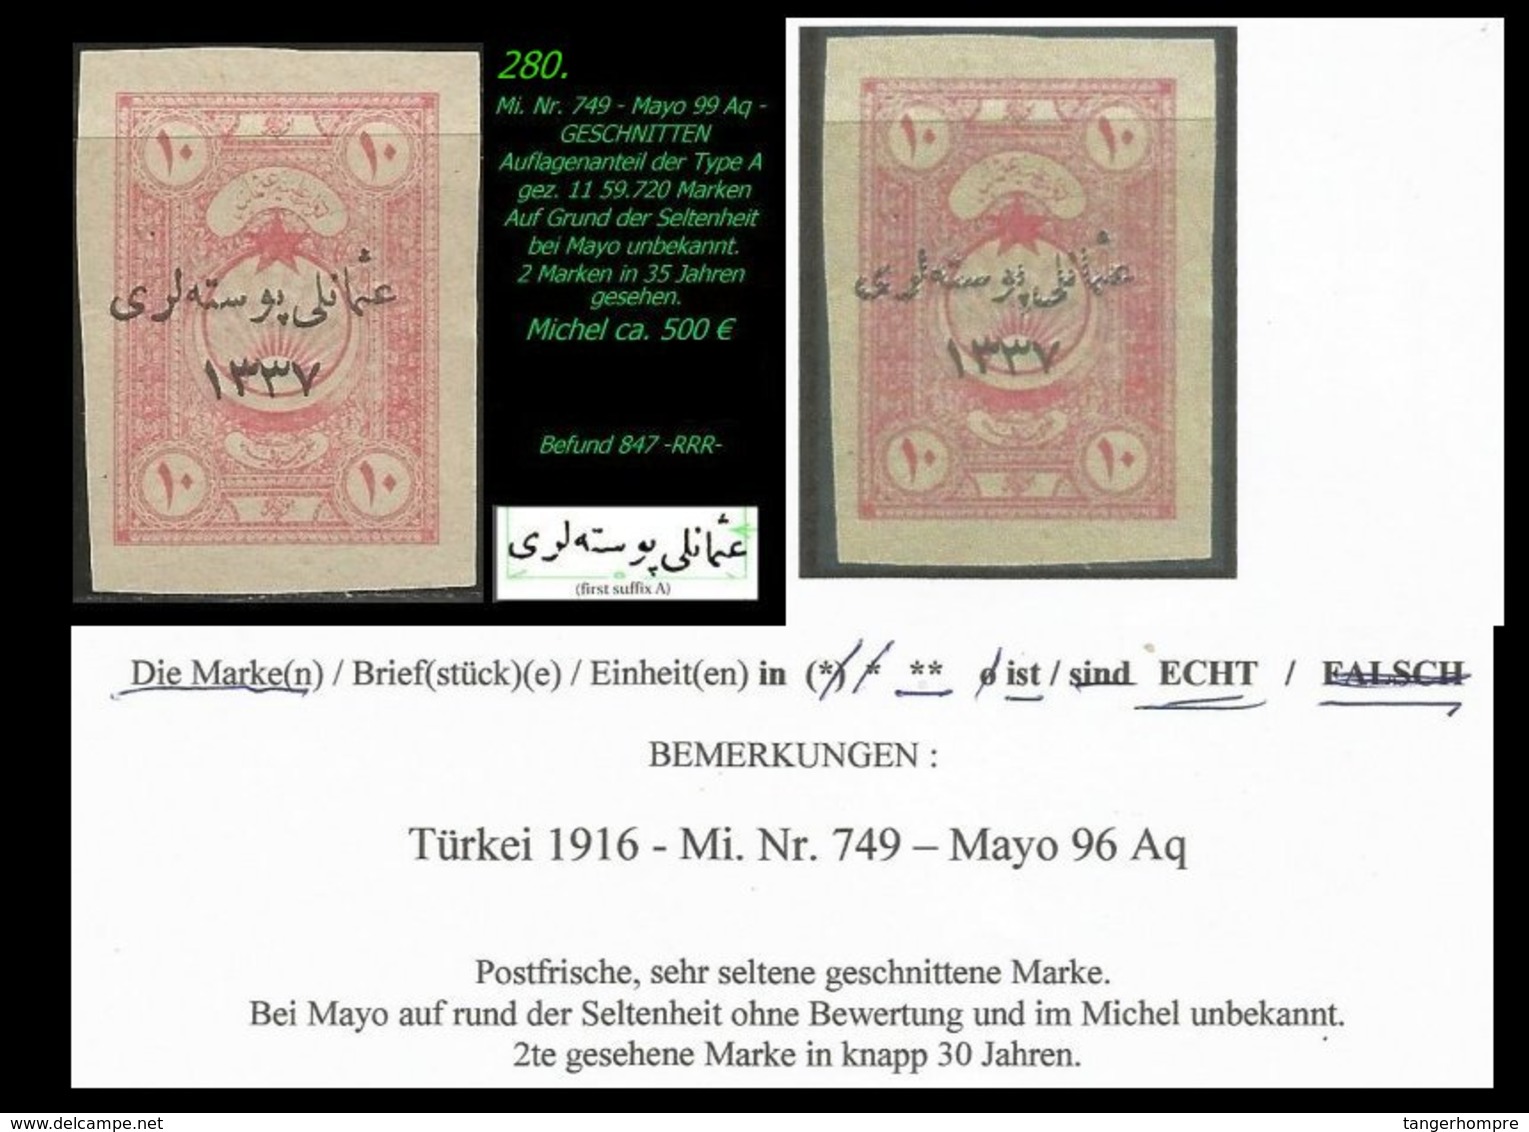 EARLY OTTOMAN SPECIALIZED FOR SPECIALIST, SEE...Mi. Nr. 749 - Mayo 99 Aq - Ungezähnt -RRR- - 1920-21 Anatolië